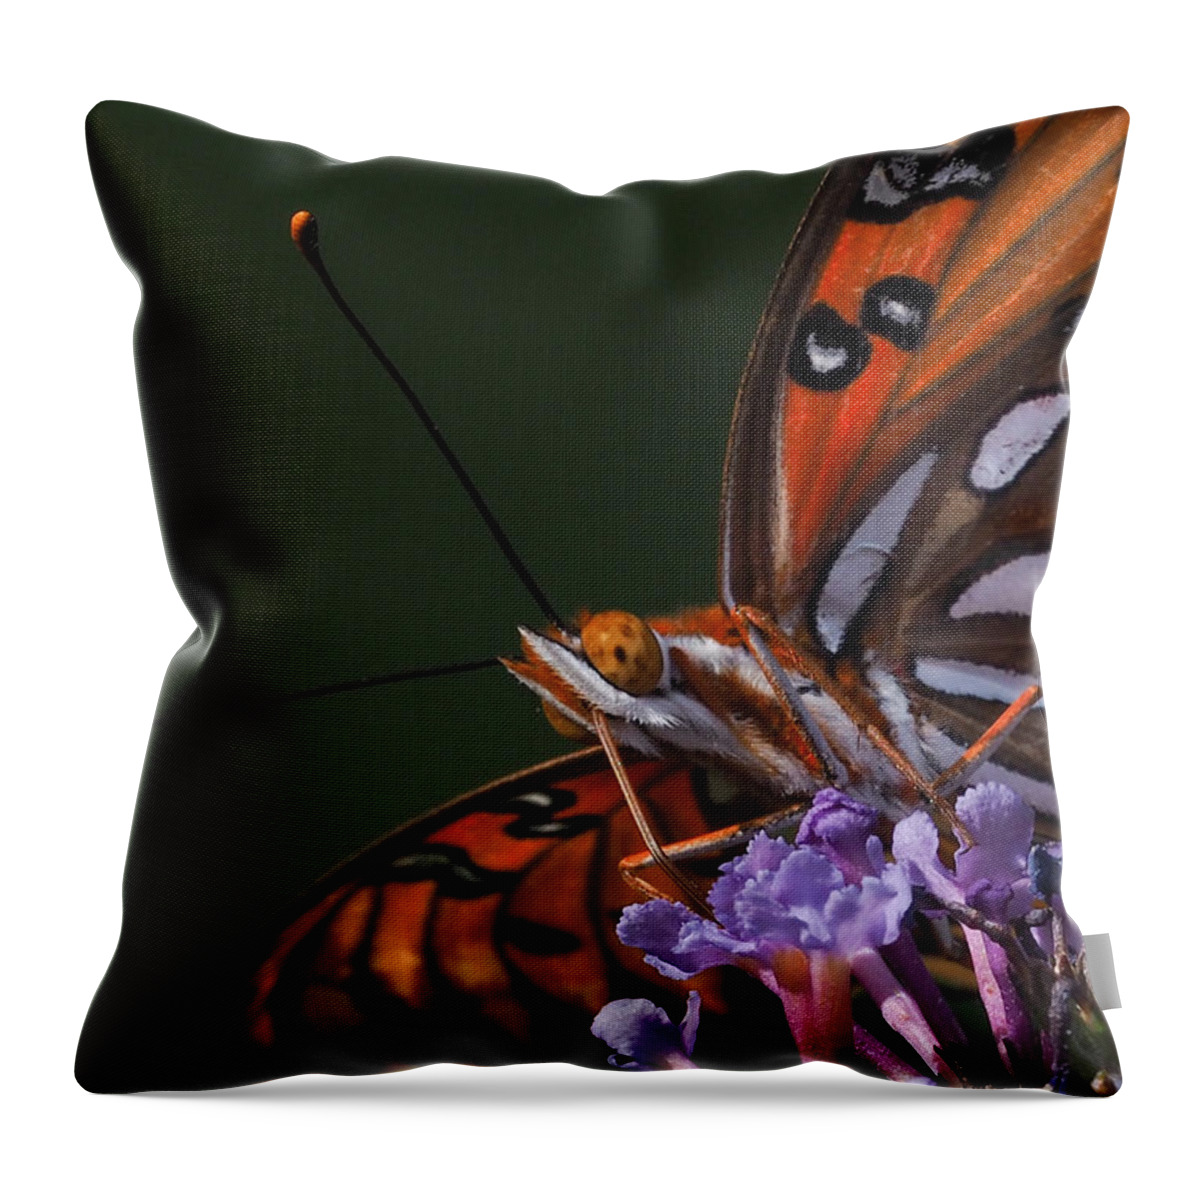 Monarch Closeup Throw Pillow featuring the photograph Monarch Butterfly Closeup by Paula Ponath